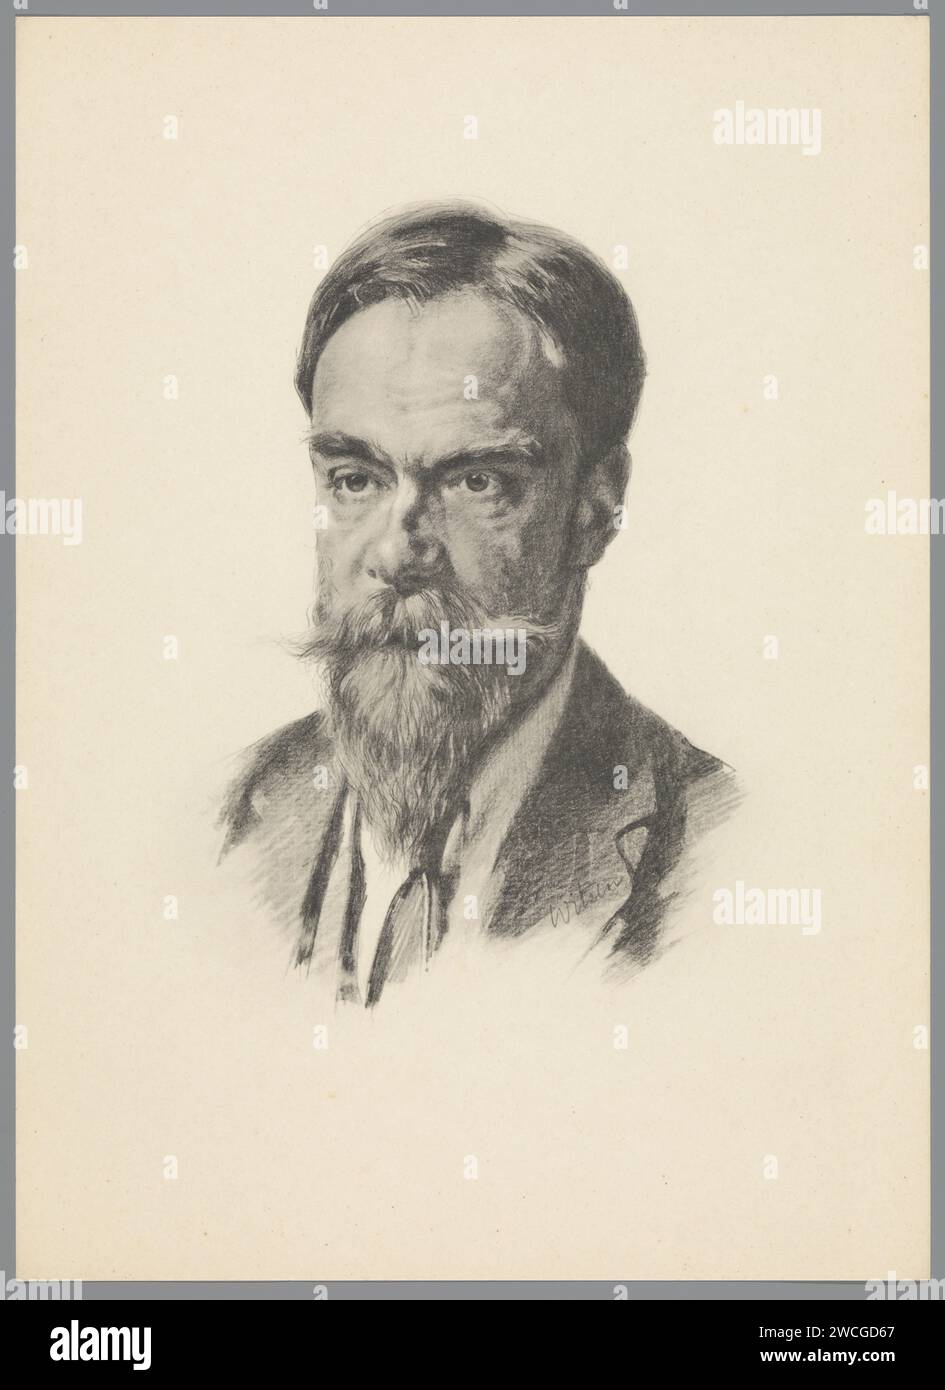 Reproduction to chalk drawing with portrait of Frans Coenen Jr., Anonymous, After Willem Witsen, c. 1860 - c. 1915 print  Netherlands paper collotype Stock Photo